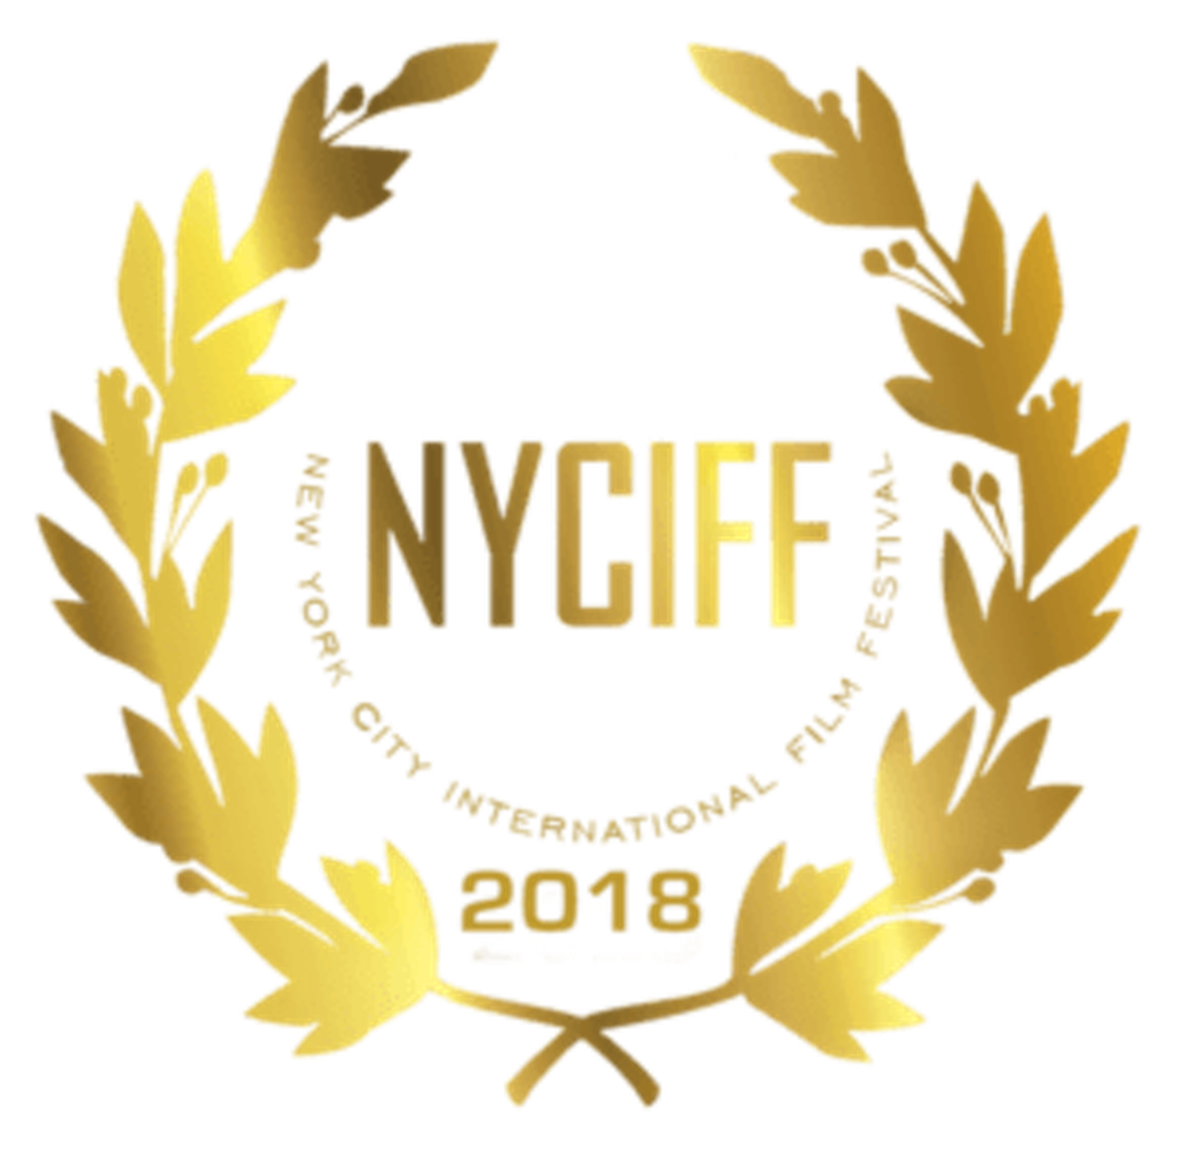 Get 10 Tickets to the NYC International Film Festival + More New York